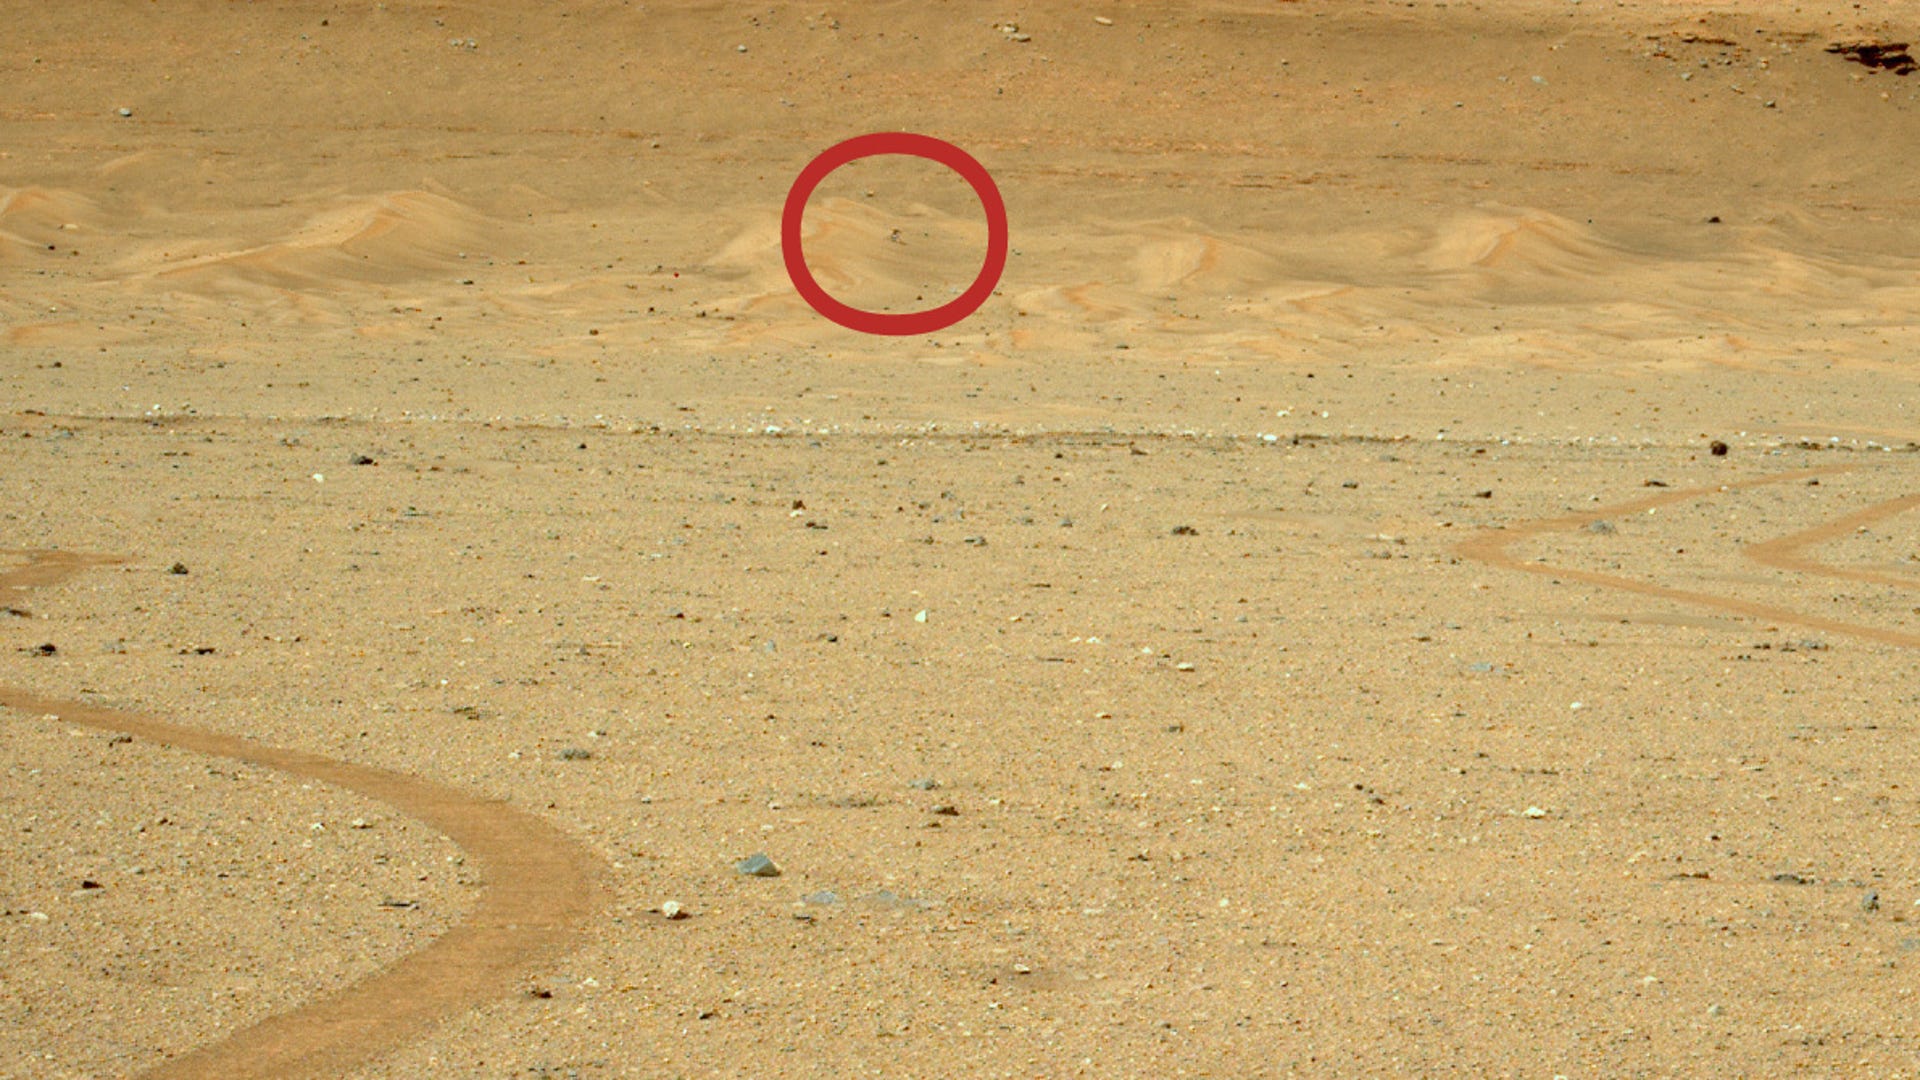 Large expanse of rocky, flat Martian landscape with a series of sand dunes in the distance. Ingenuity helicopter marked by a red circle.